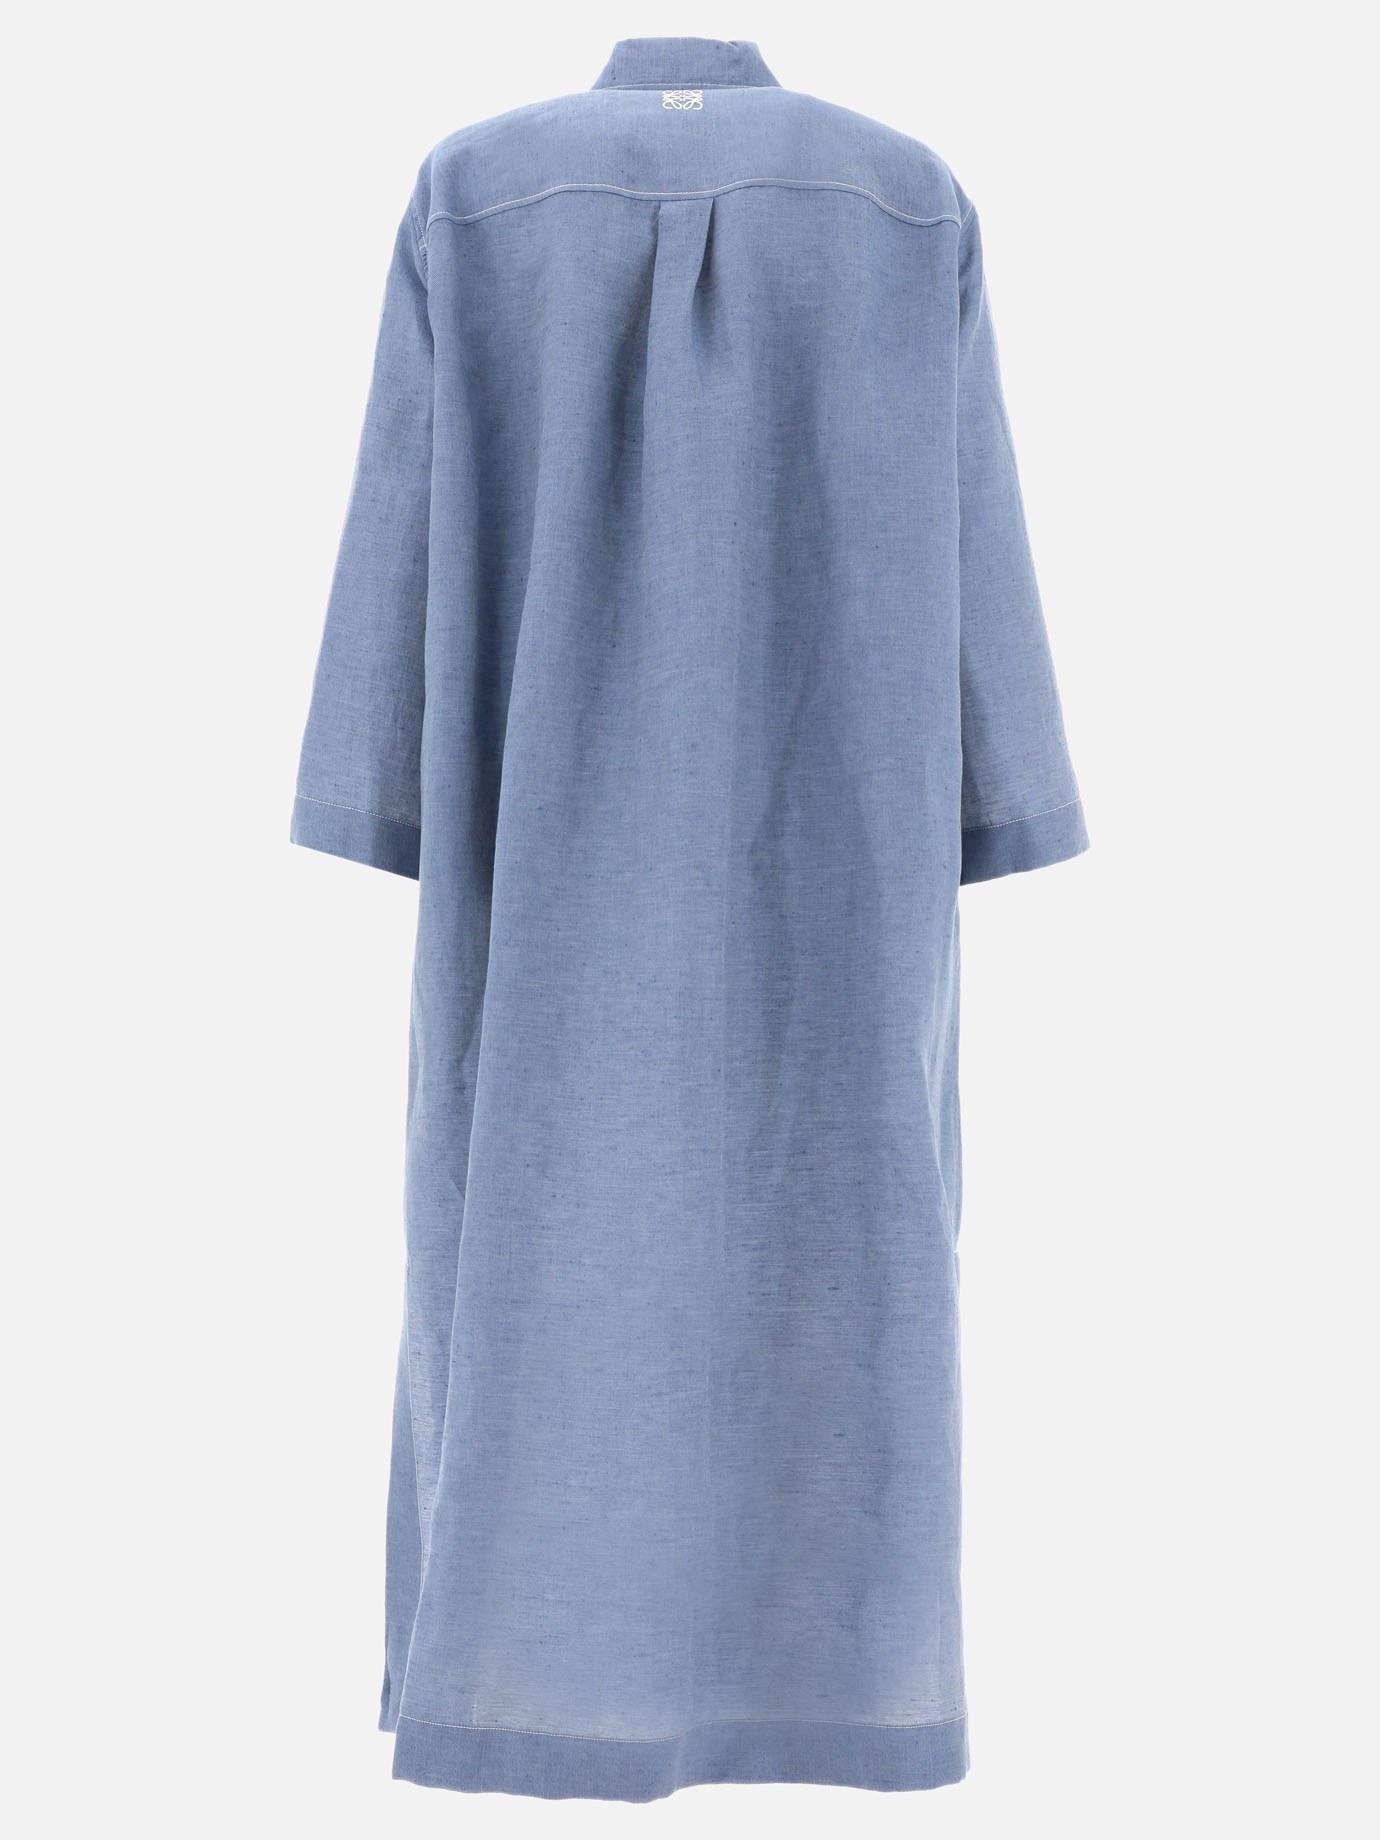 Tunic dress with buttons by Loewe